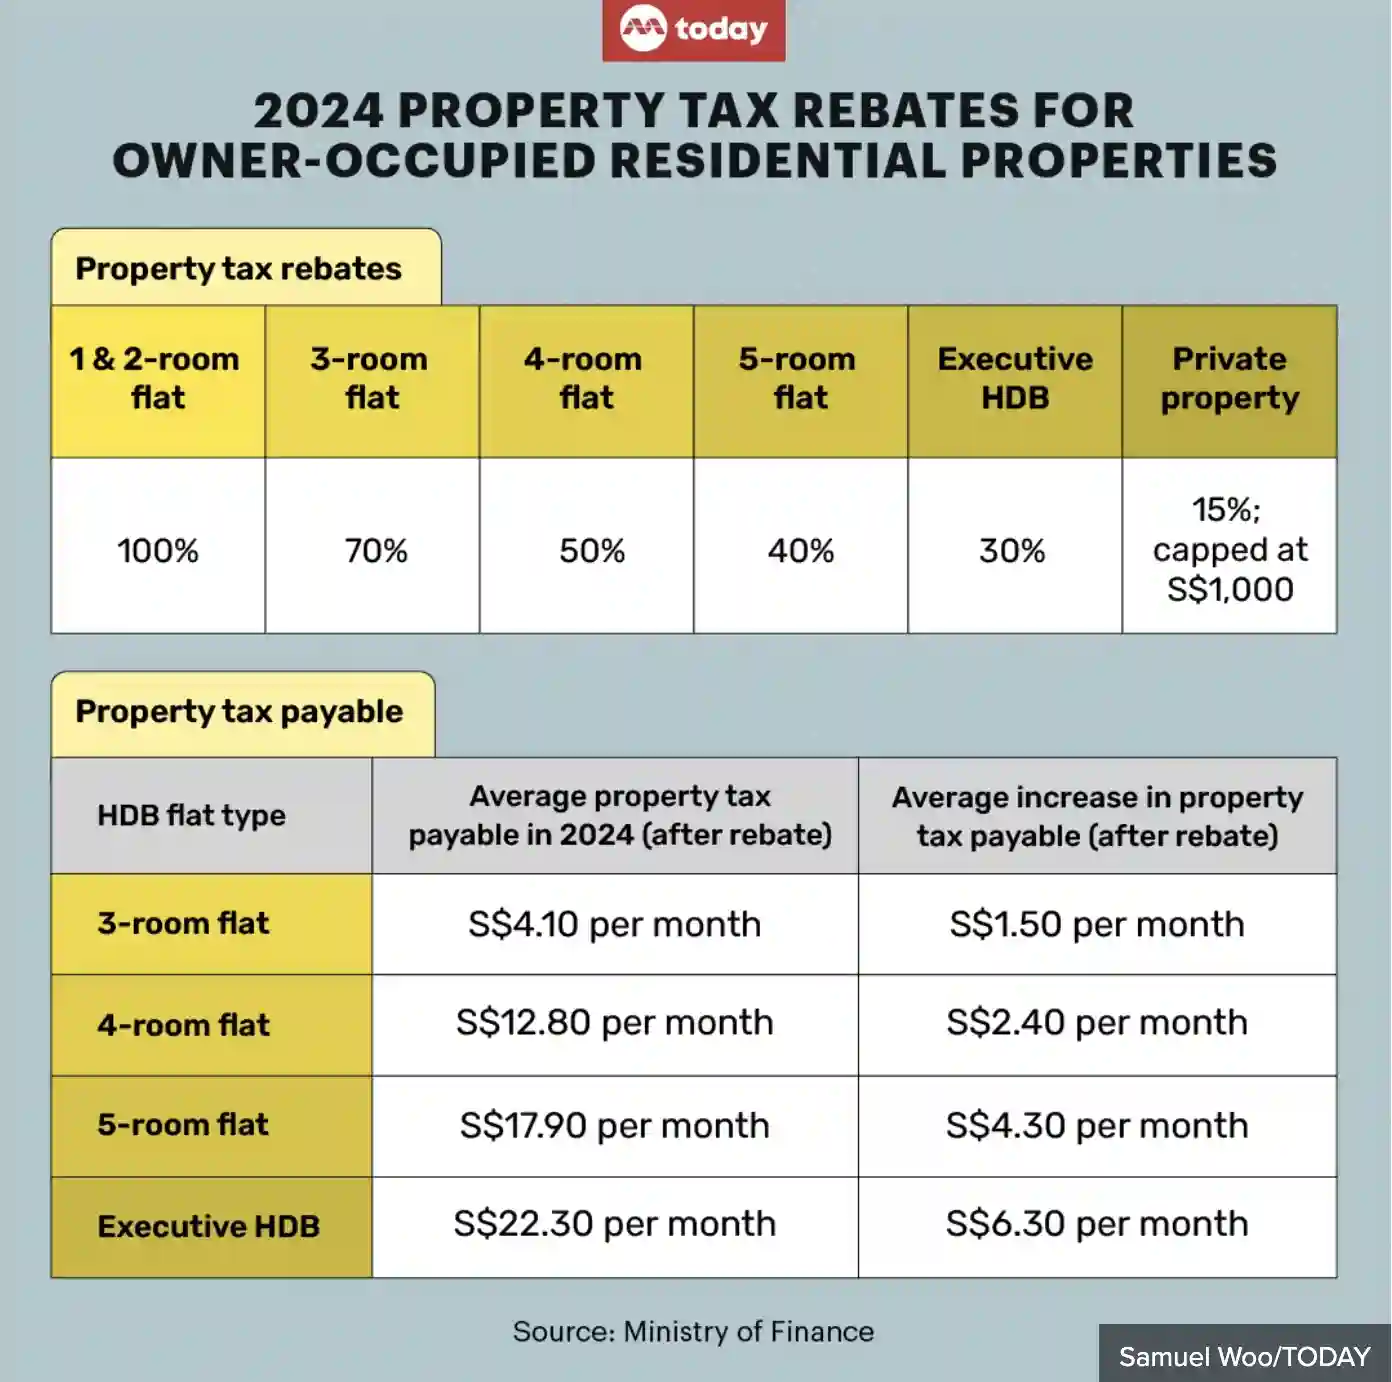 One-Off Rebate For Owner-Occupied Homes In 2024. Source: Today